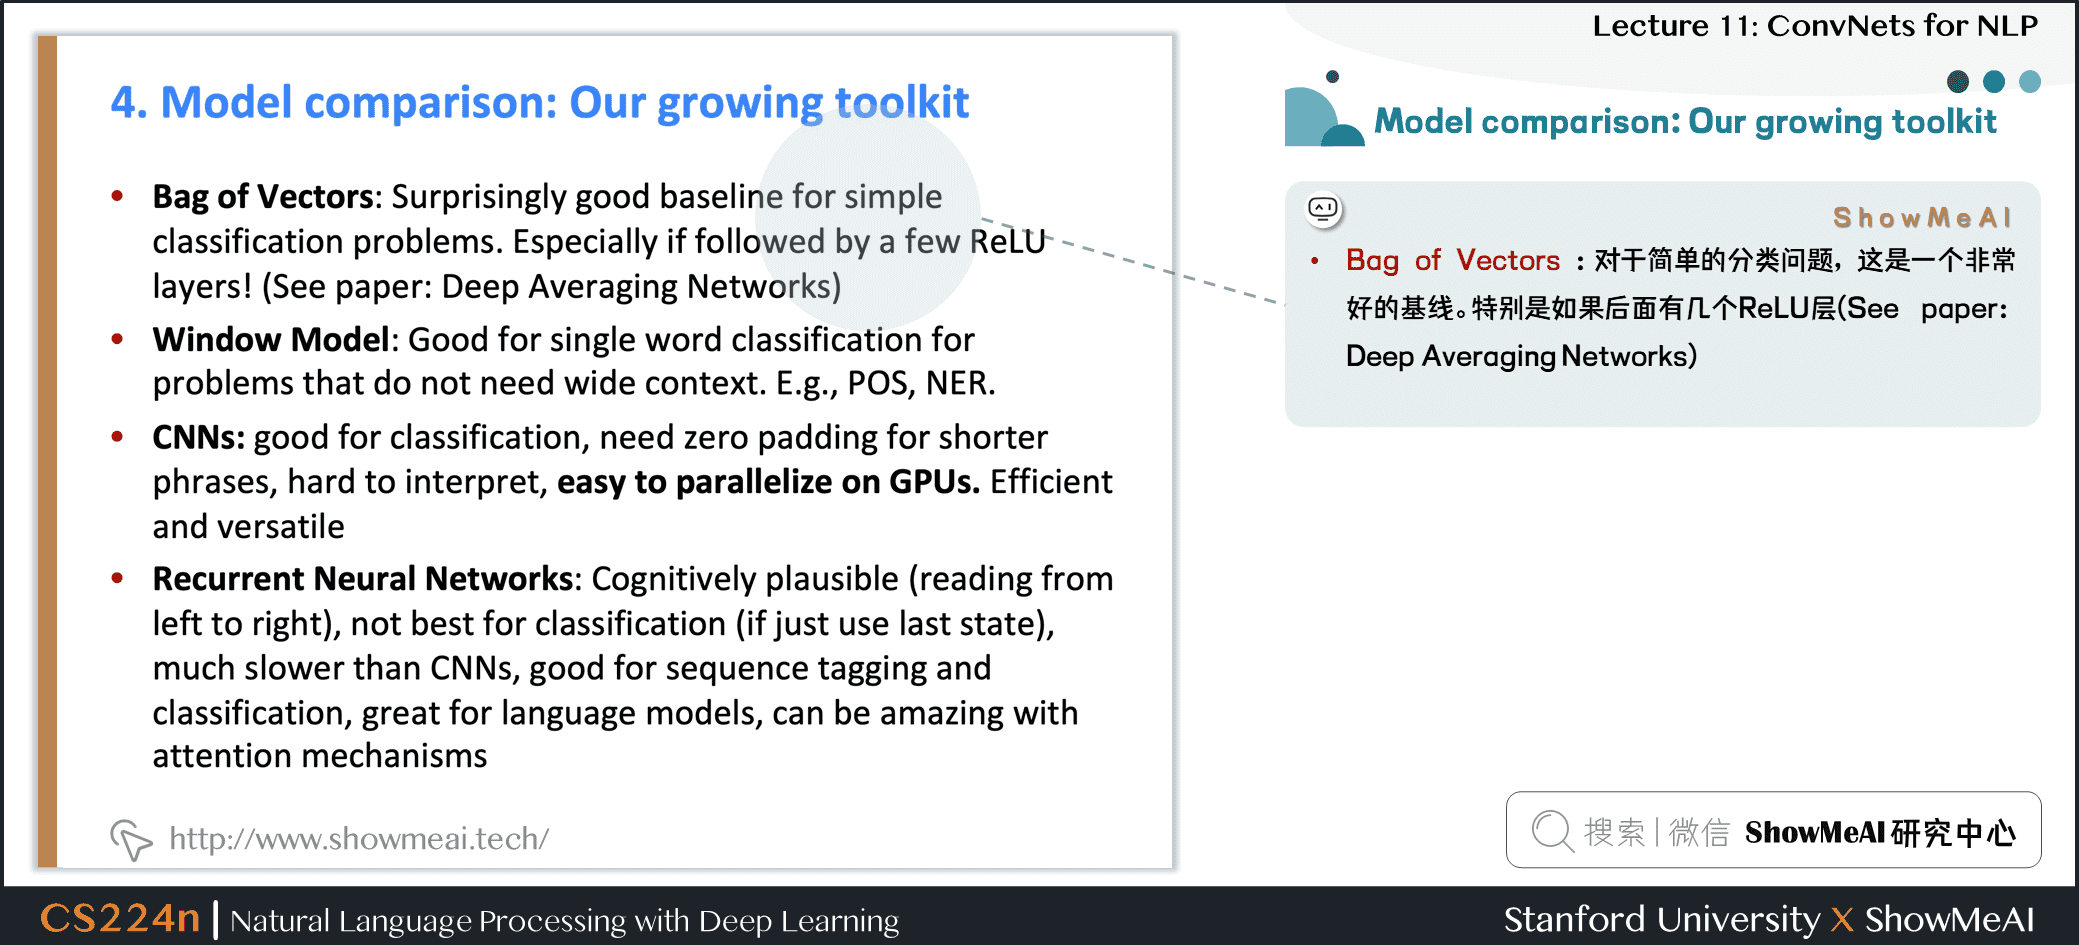 Model comparison: Our growing toolkit